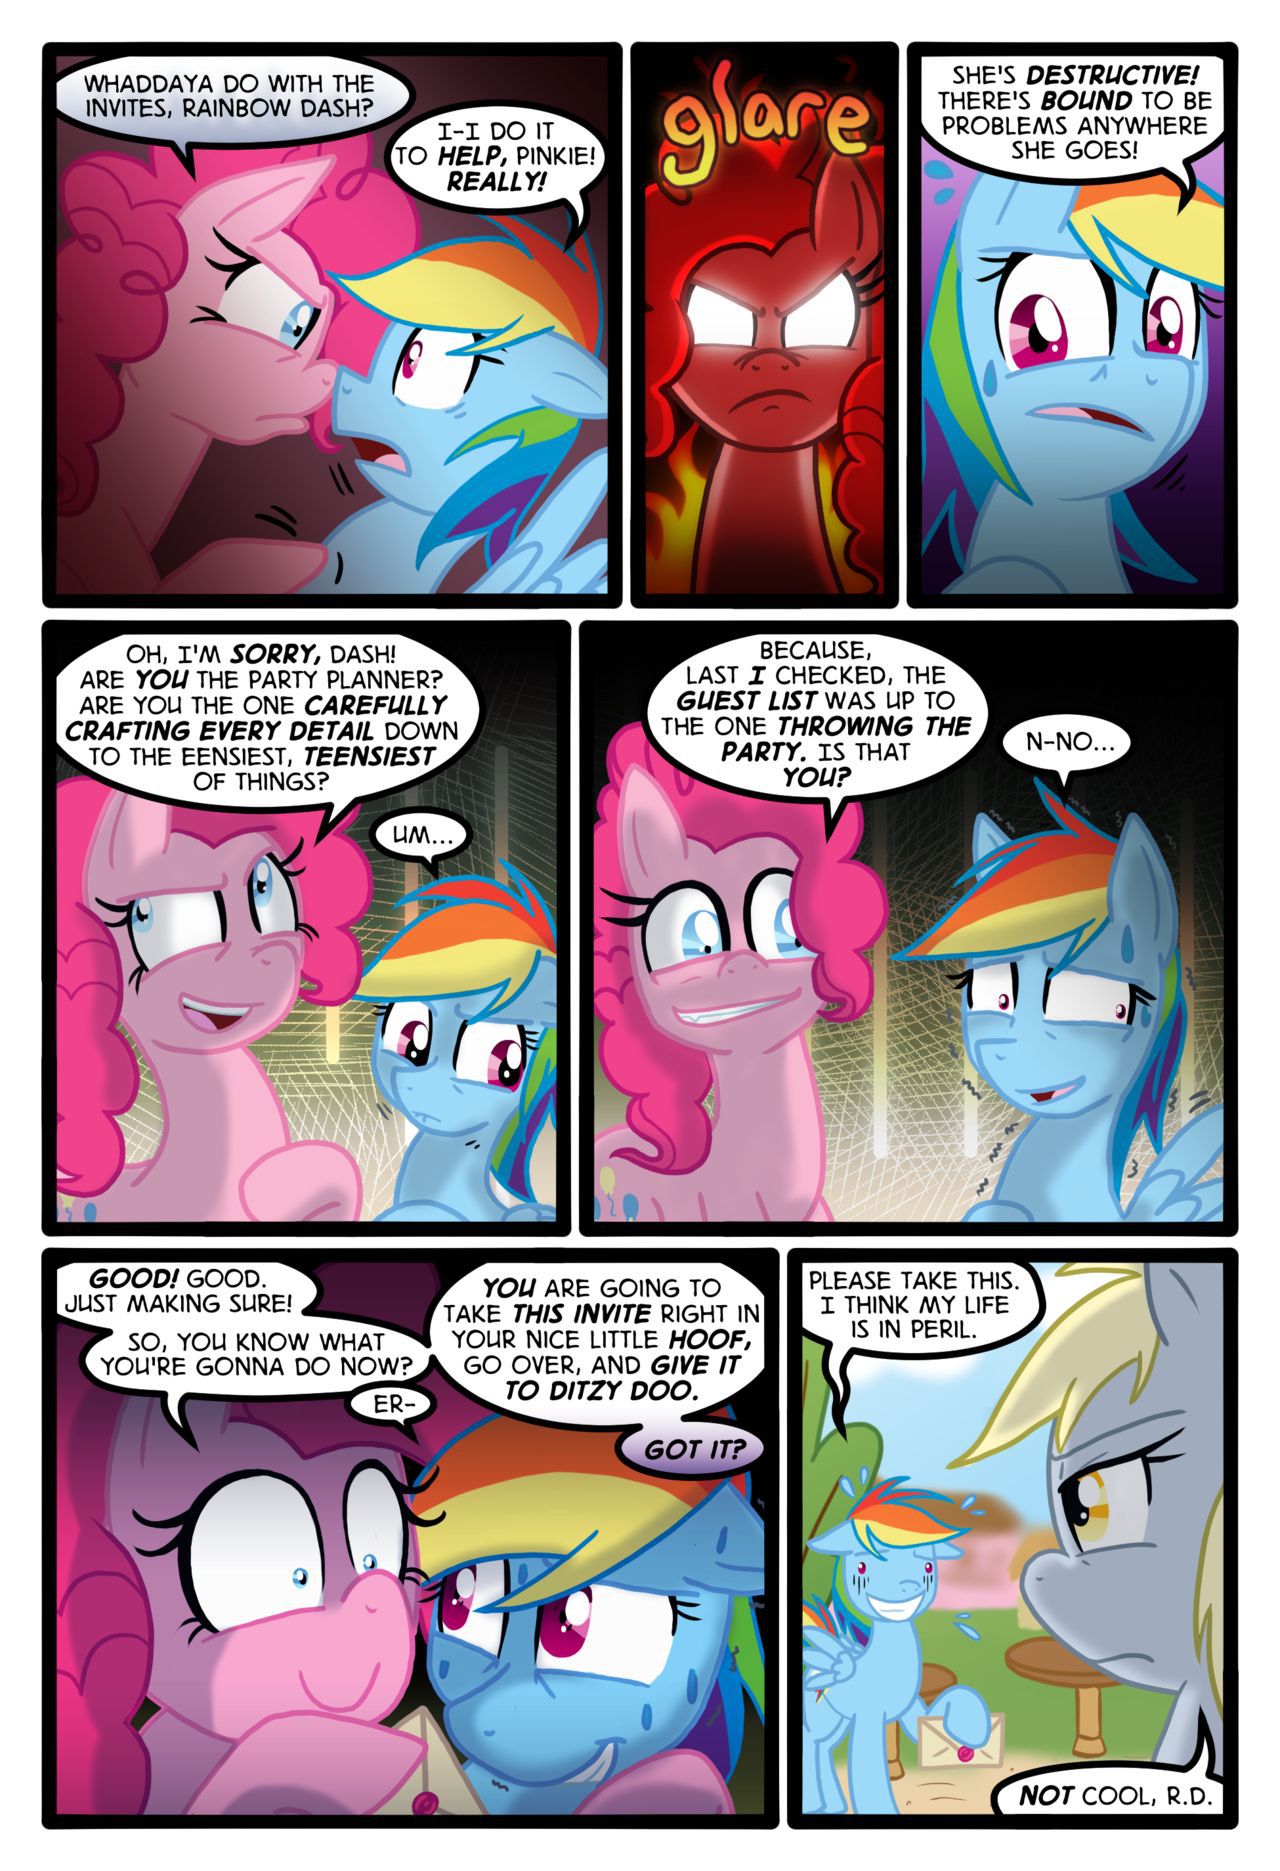 [Zaron] Lonely Hooves (My Little Pony Friendship Is Magic) [Ongoing] 26